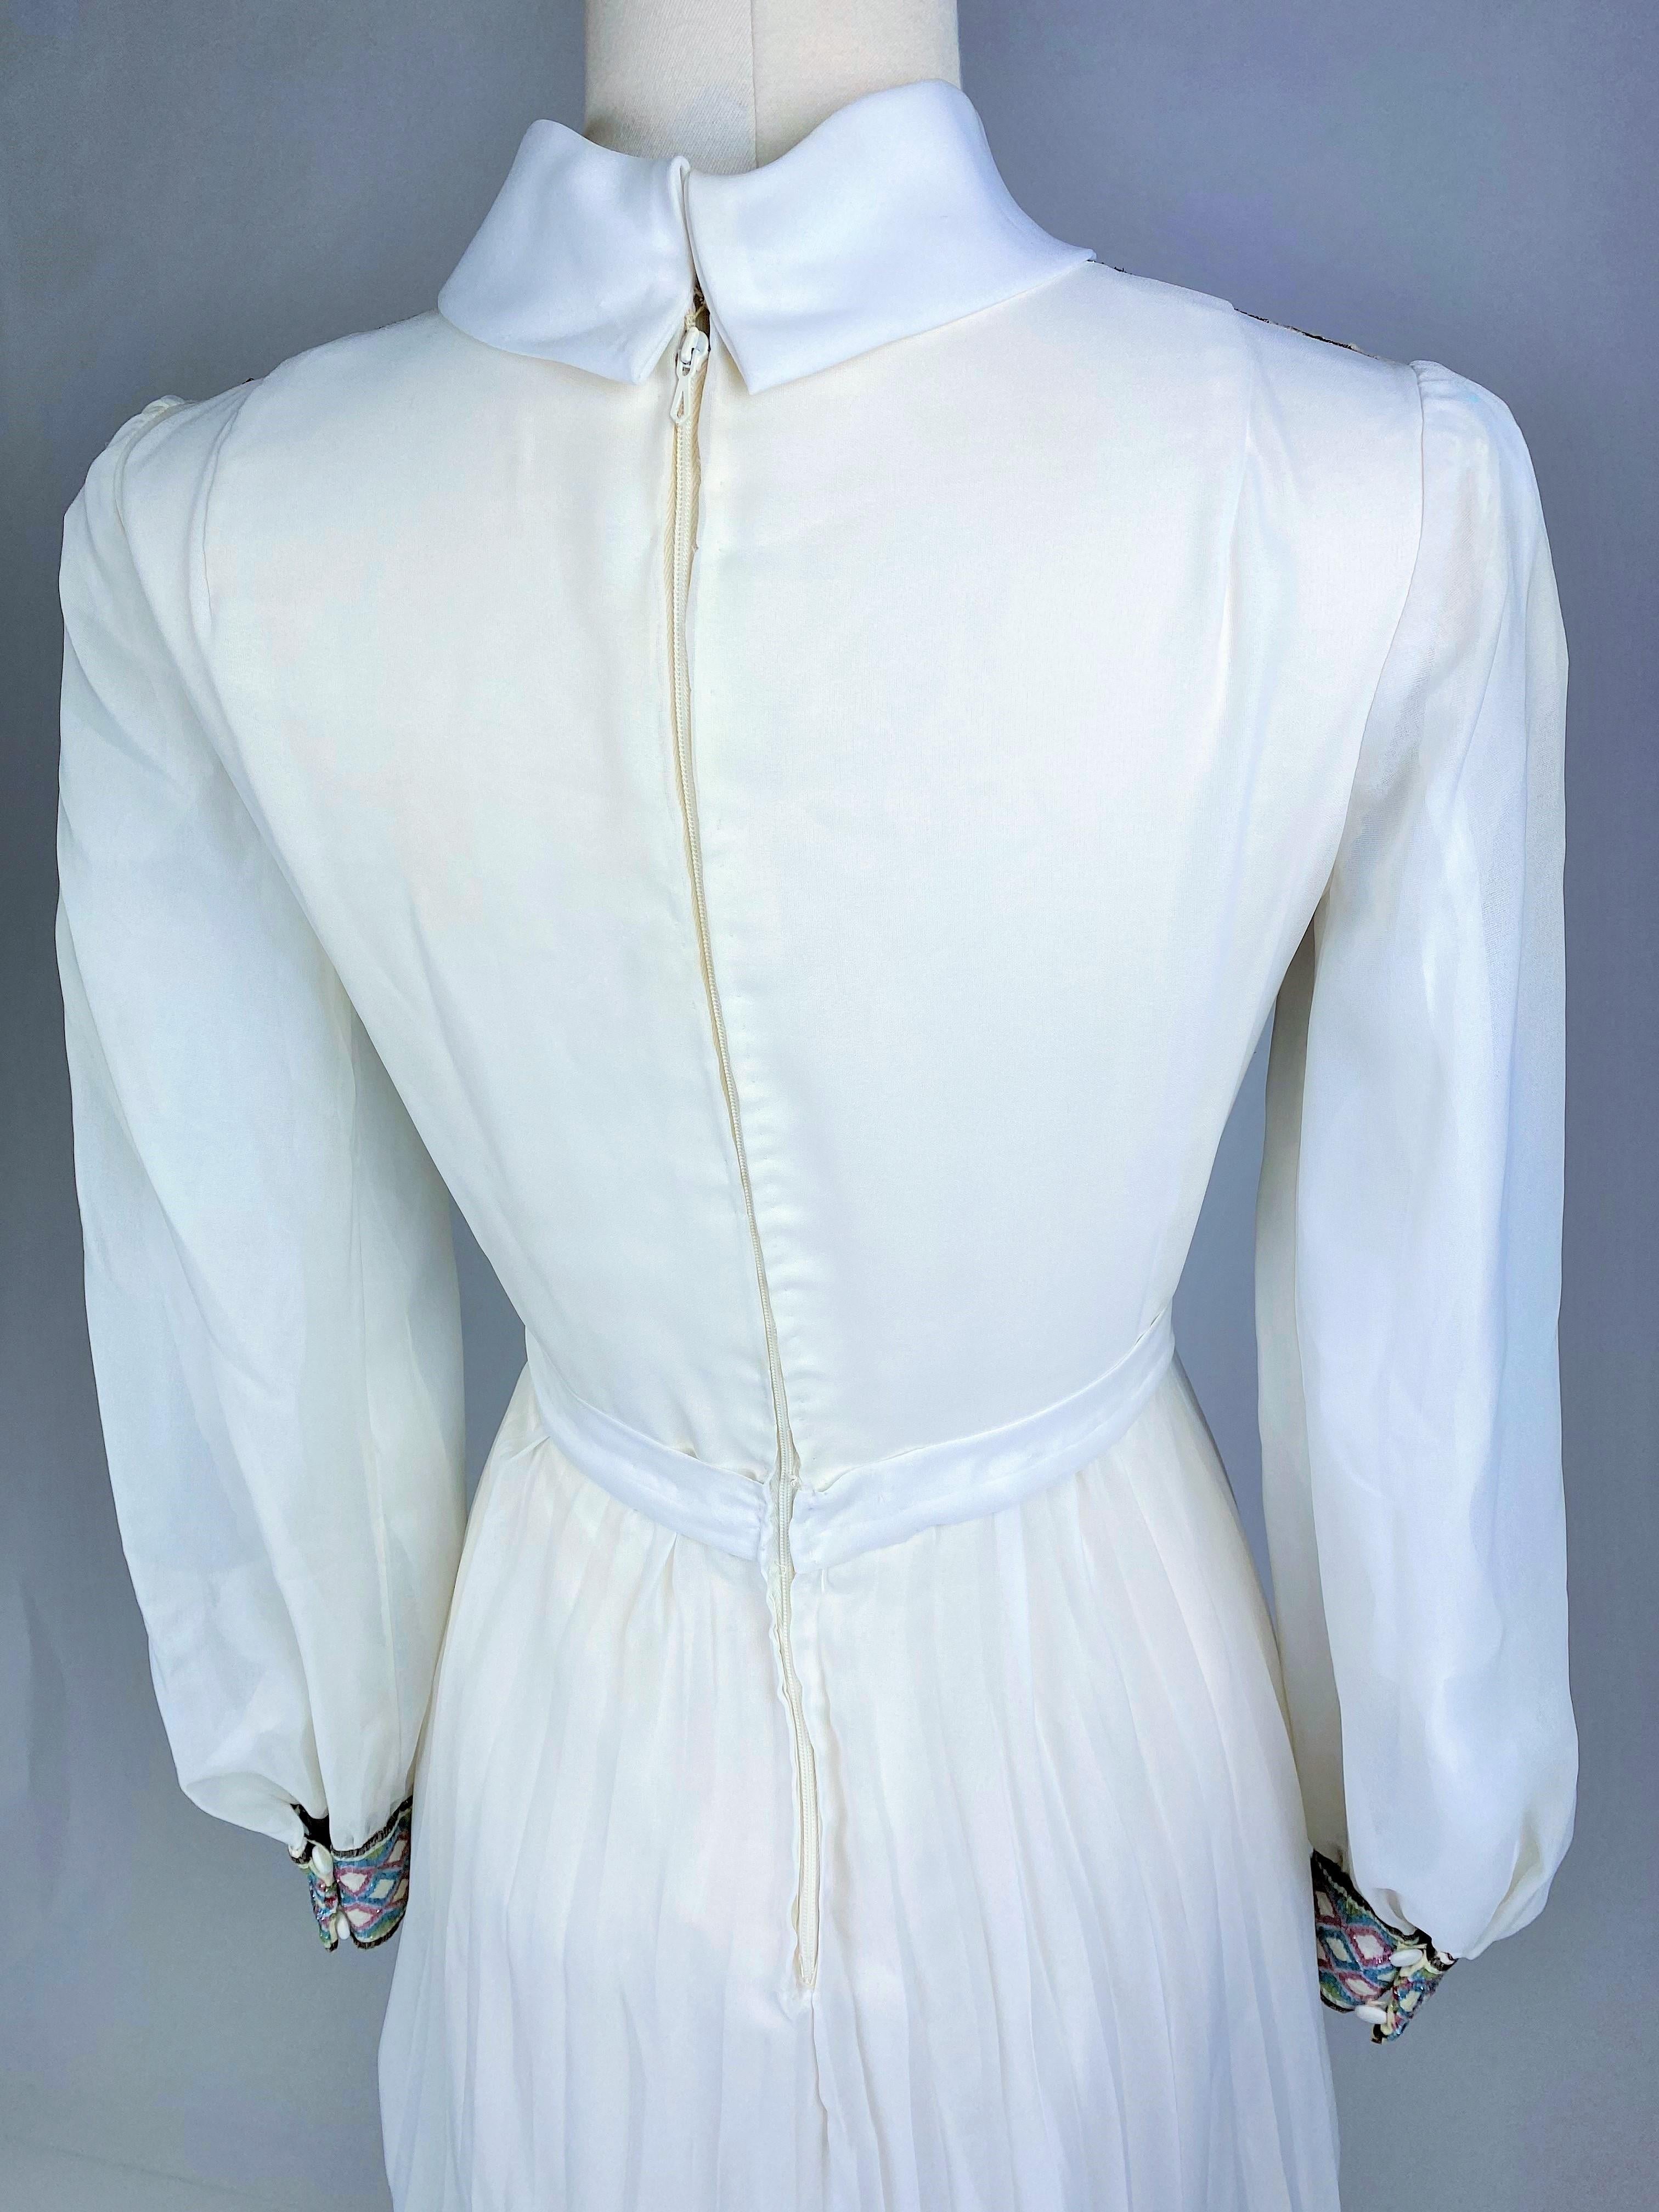 Nylon and lurex crepe formal dress - France Circa 1972 For Sale 6